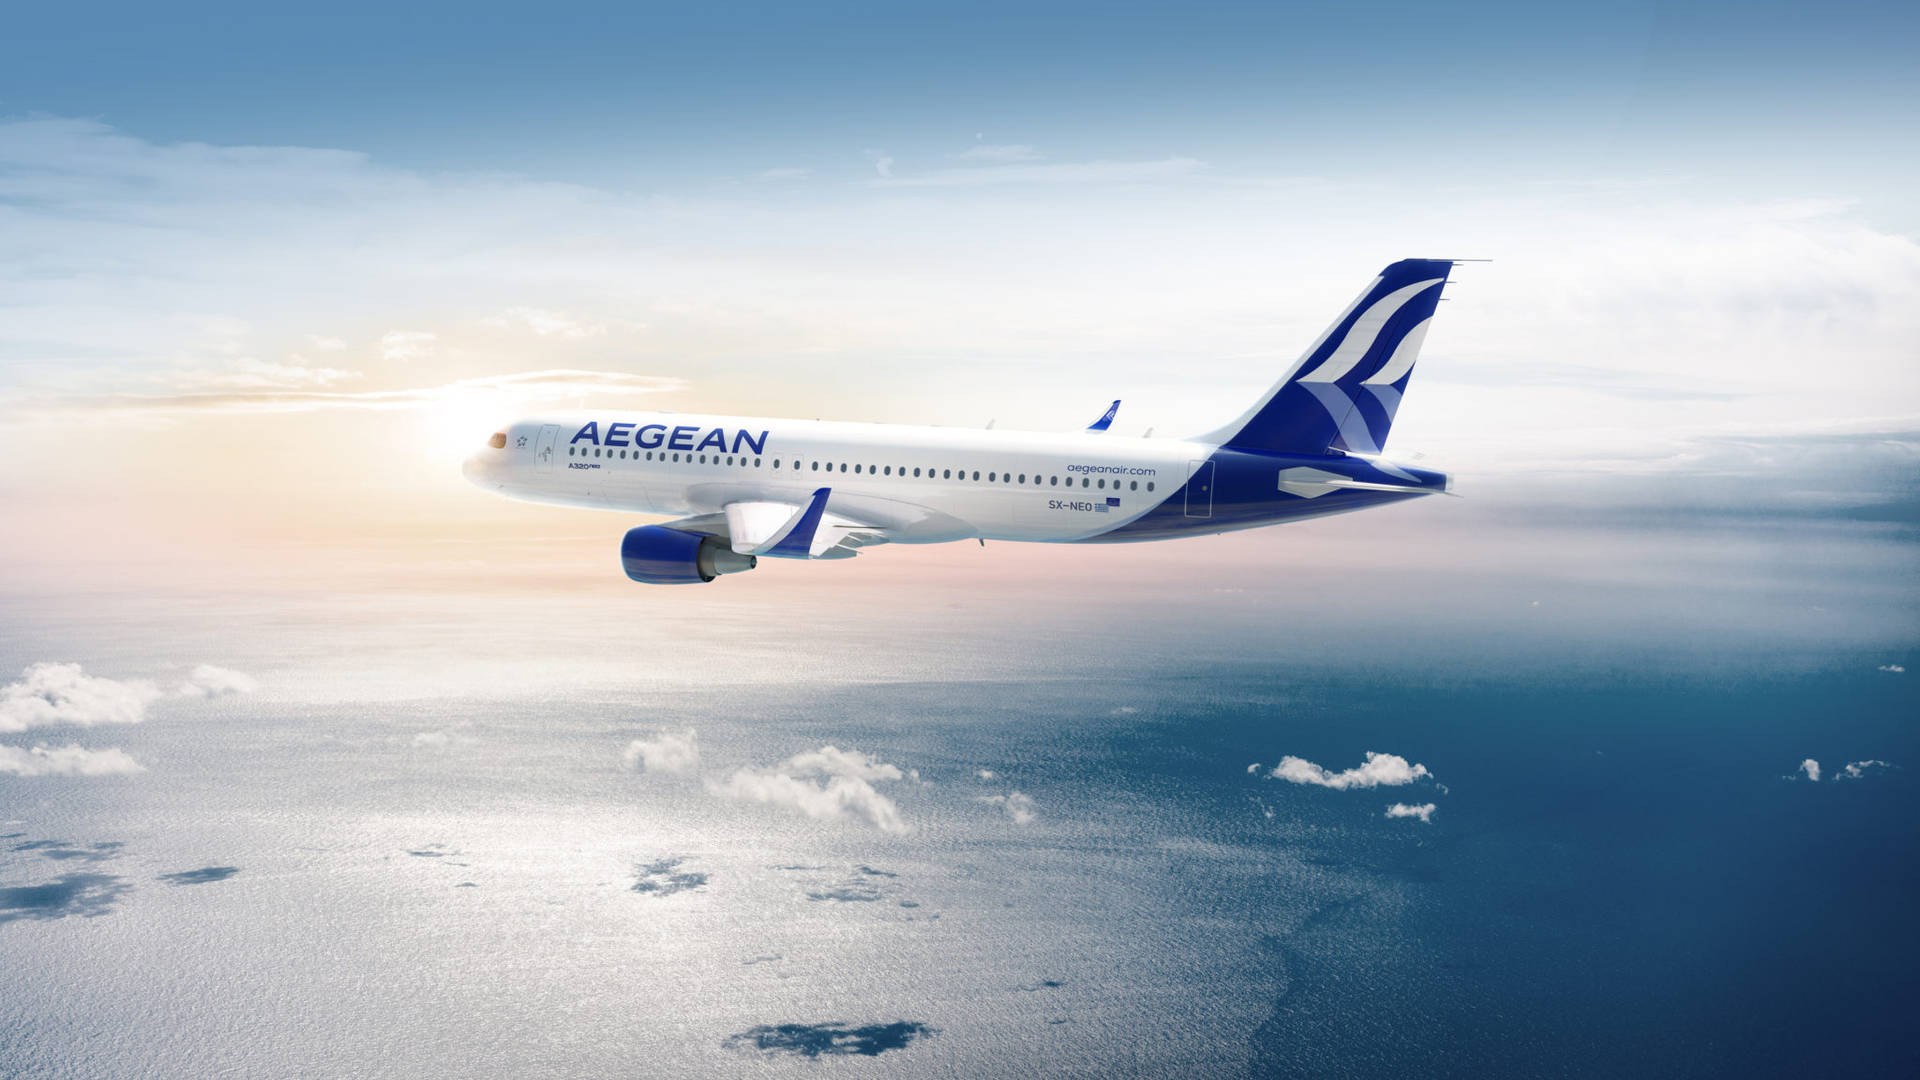 Aegean Airlines Airbus A320neo Above Ocean Wallpaper